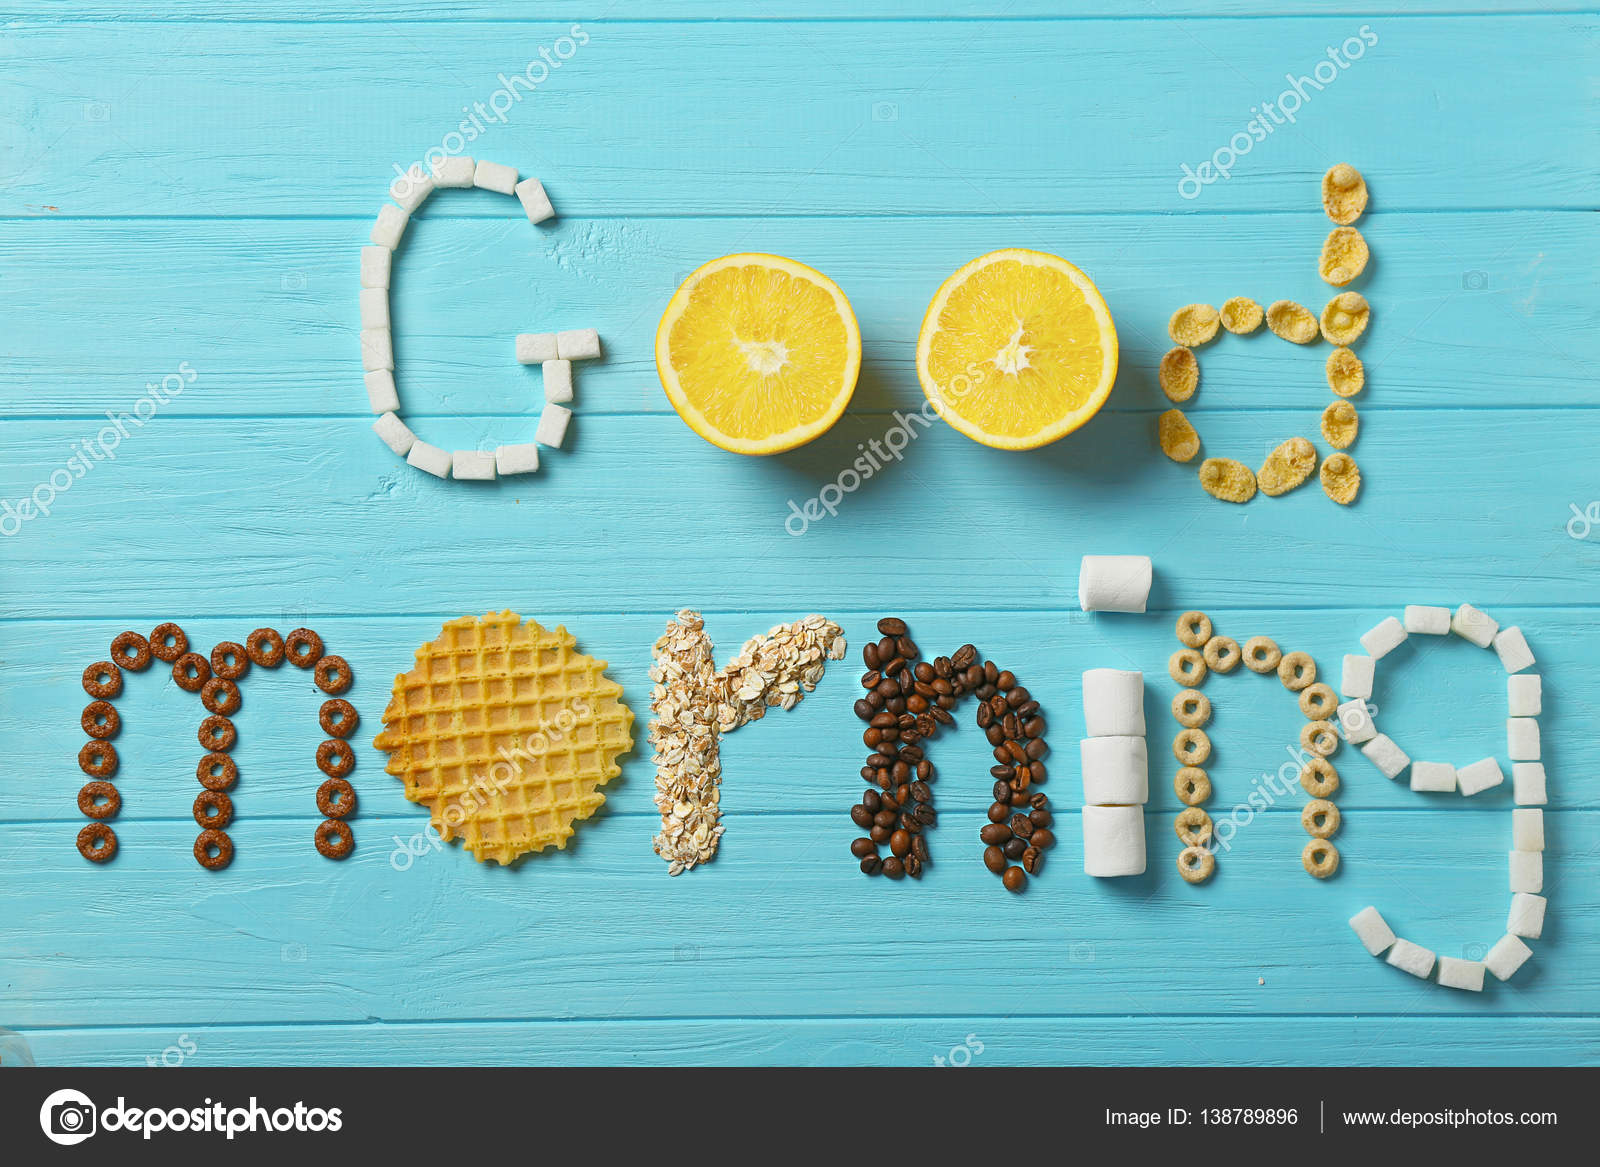 GOOD MORNING made with food — Photo